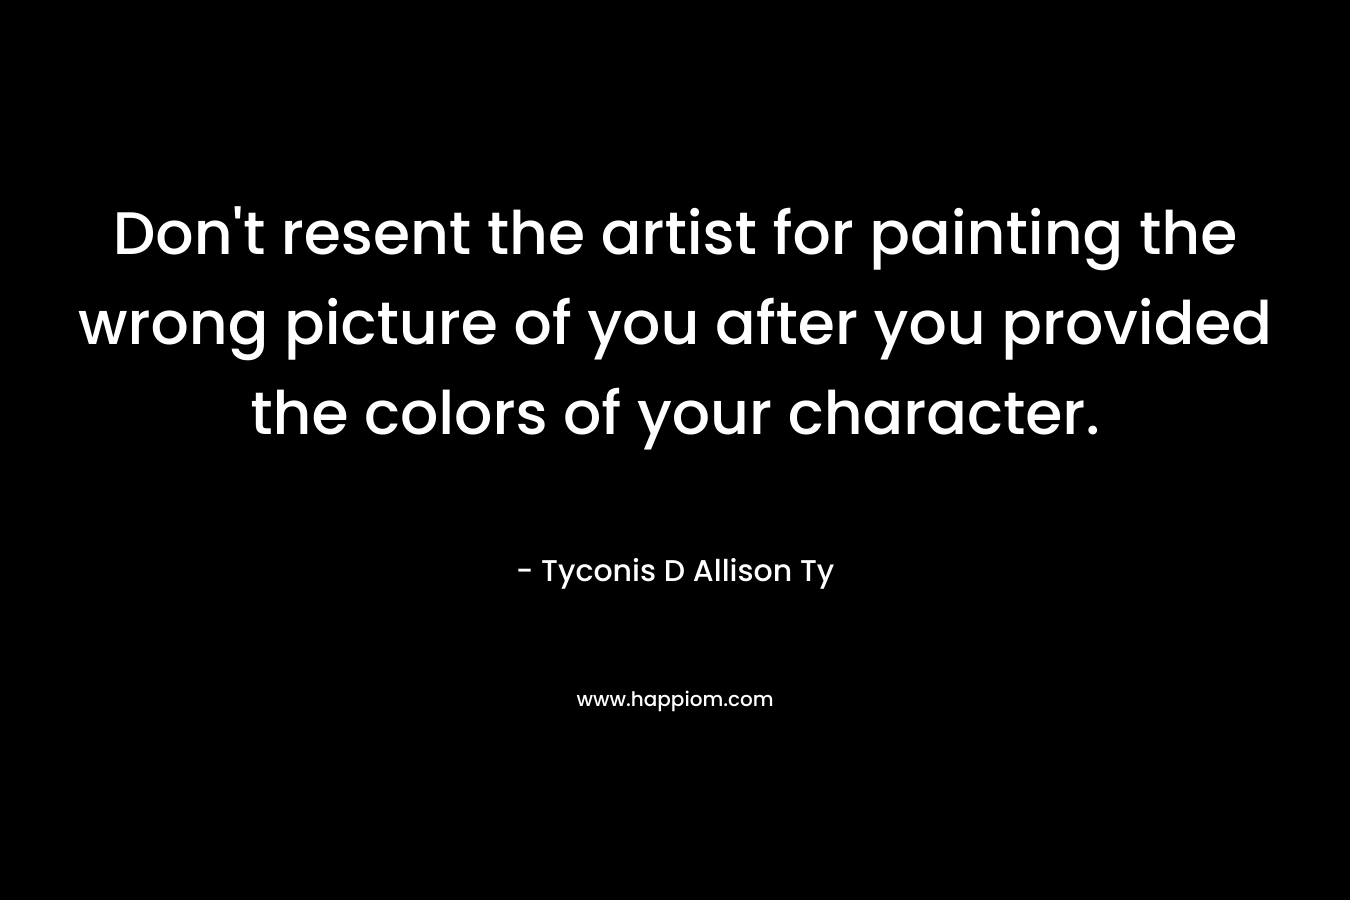 Don’t resent the artist for painting the wrong picture of you after you provided the colors of your character. – Tyconis D Allison Ty